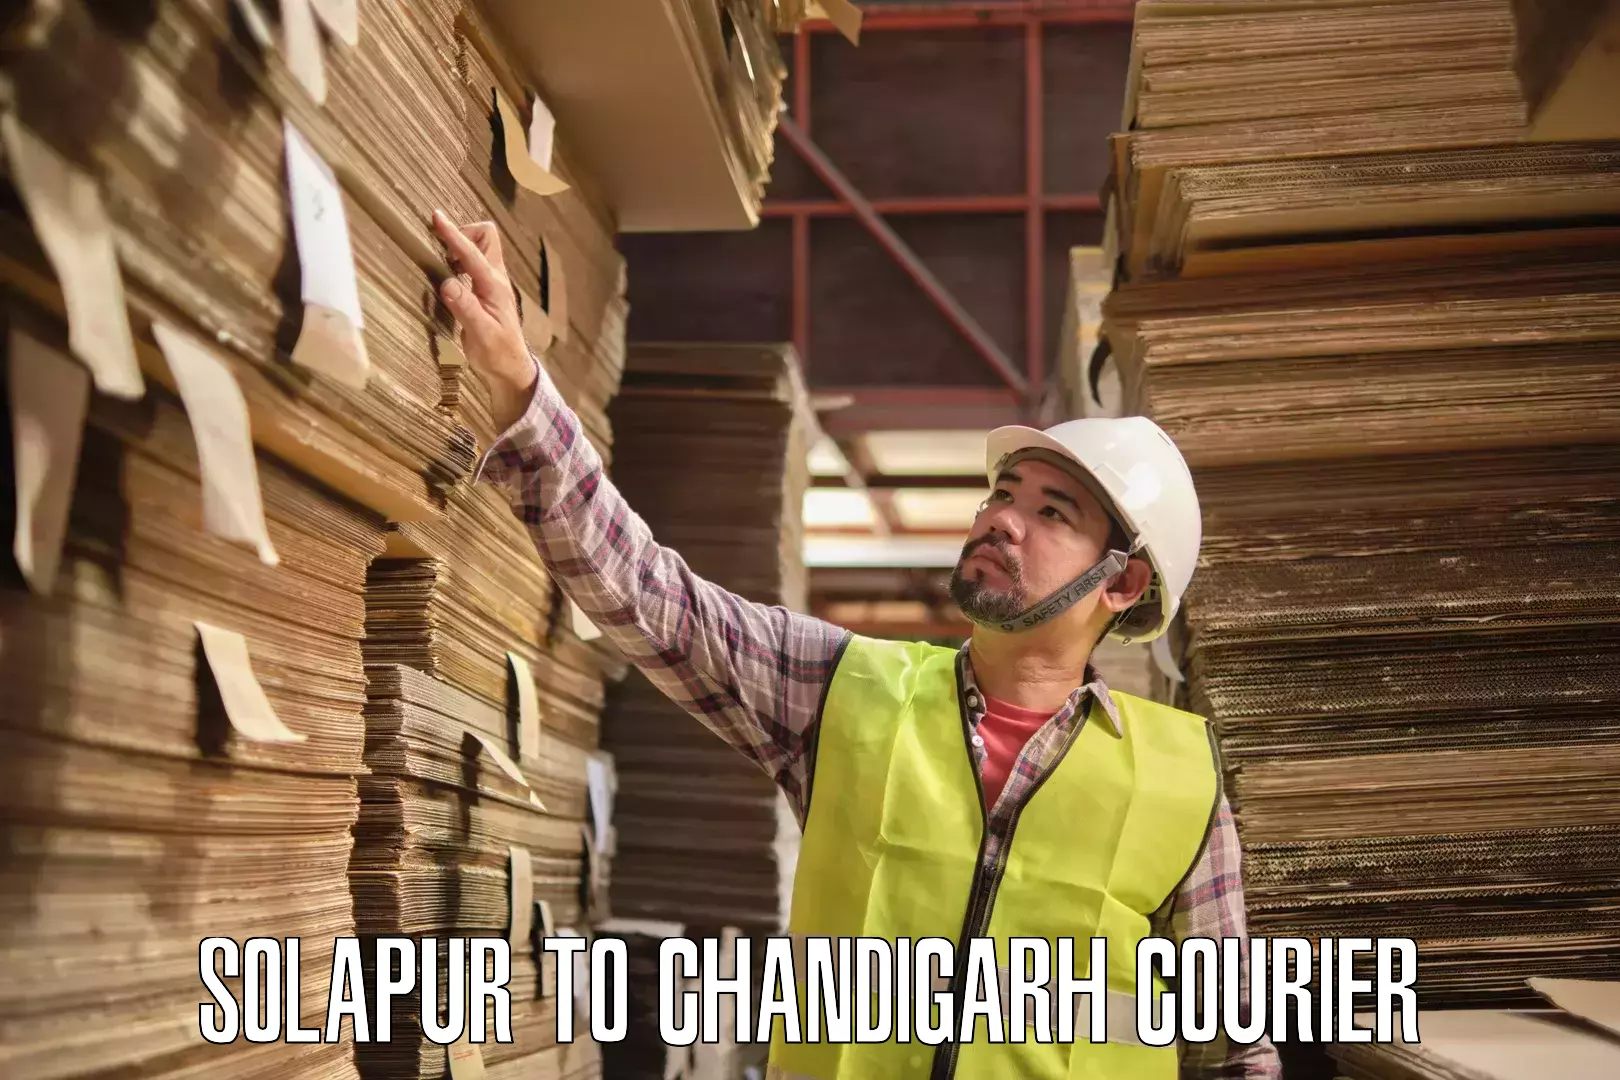 Global freight services Solapur to Chandigarh